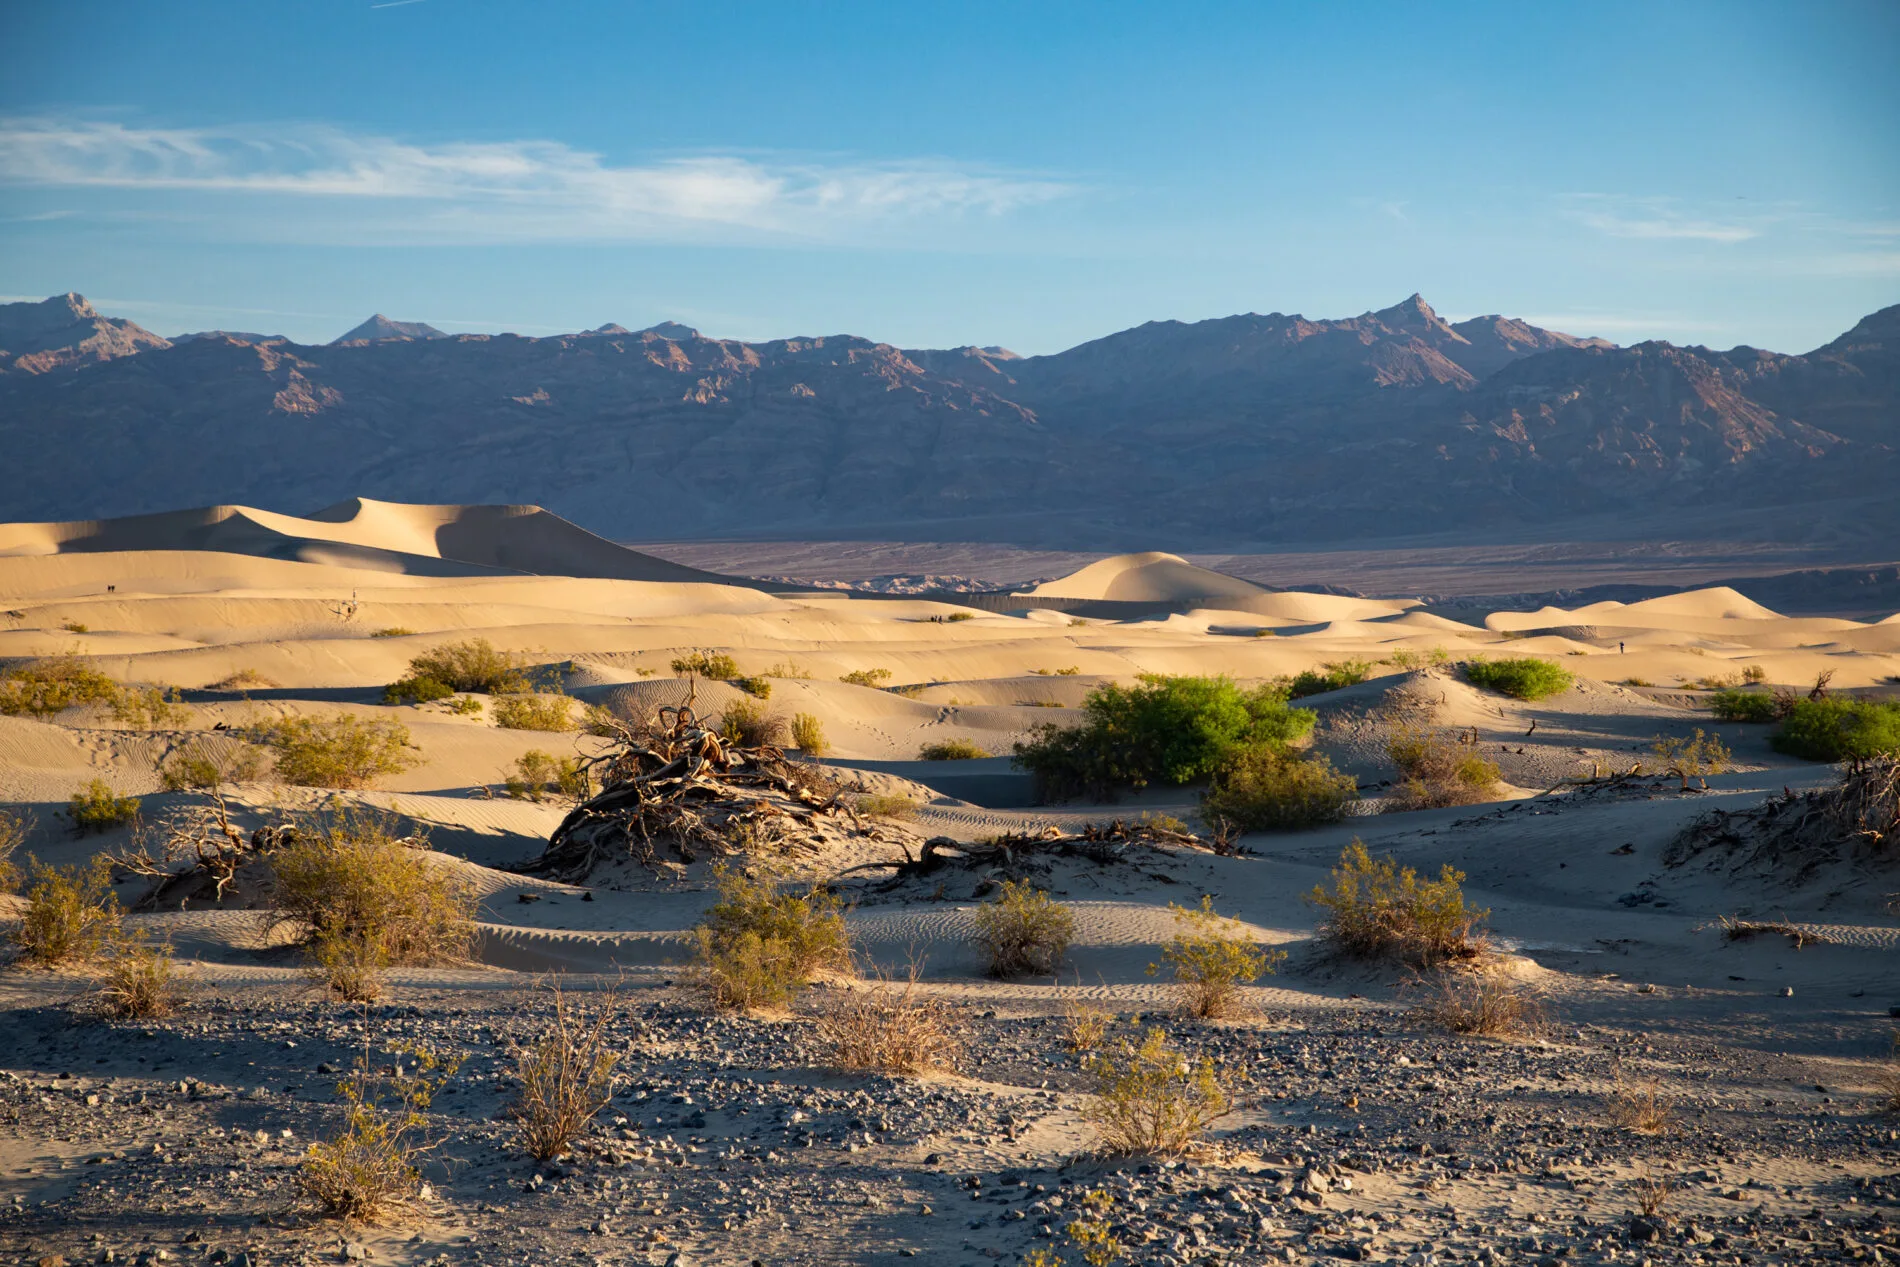 Mesquite Flat Sand Dunes is a popular area for hiking in Death Valley National Park.